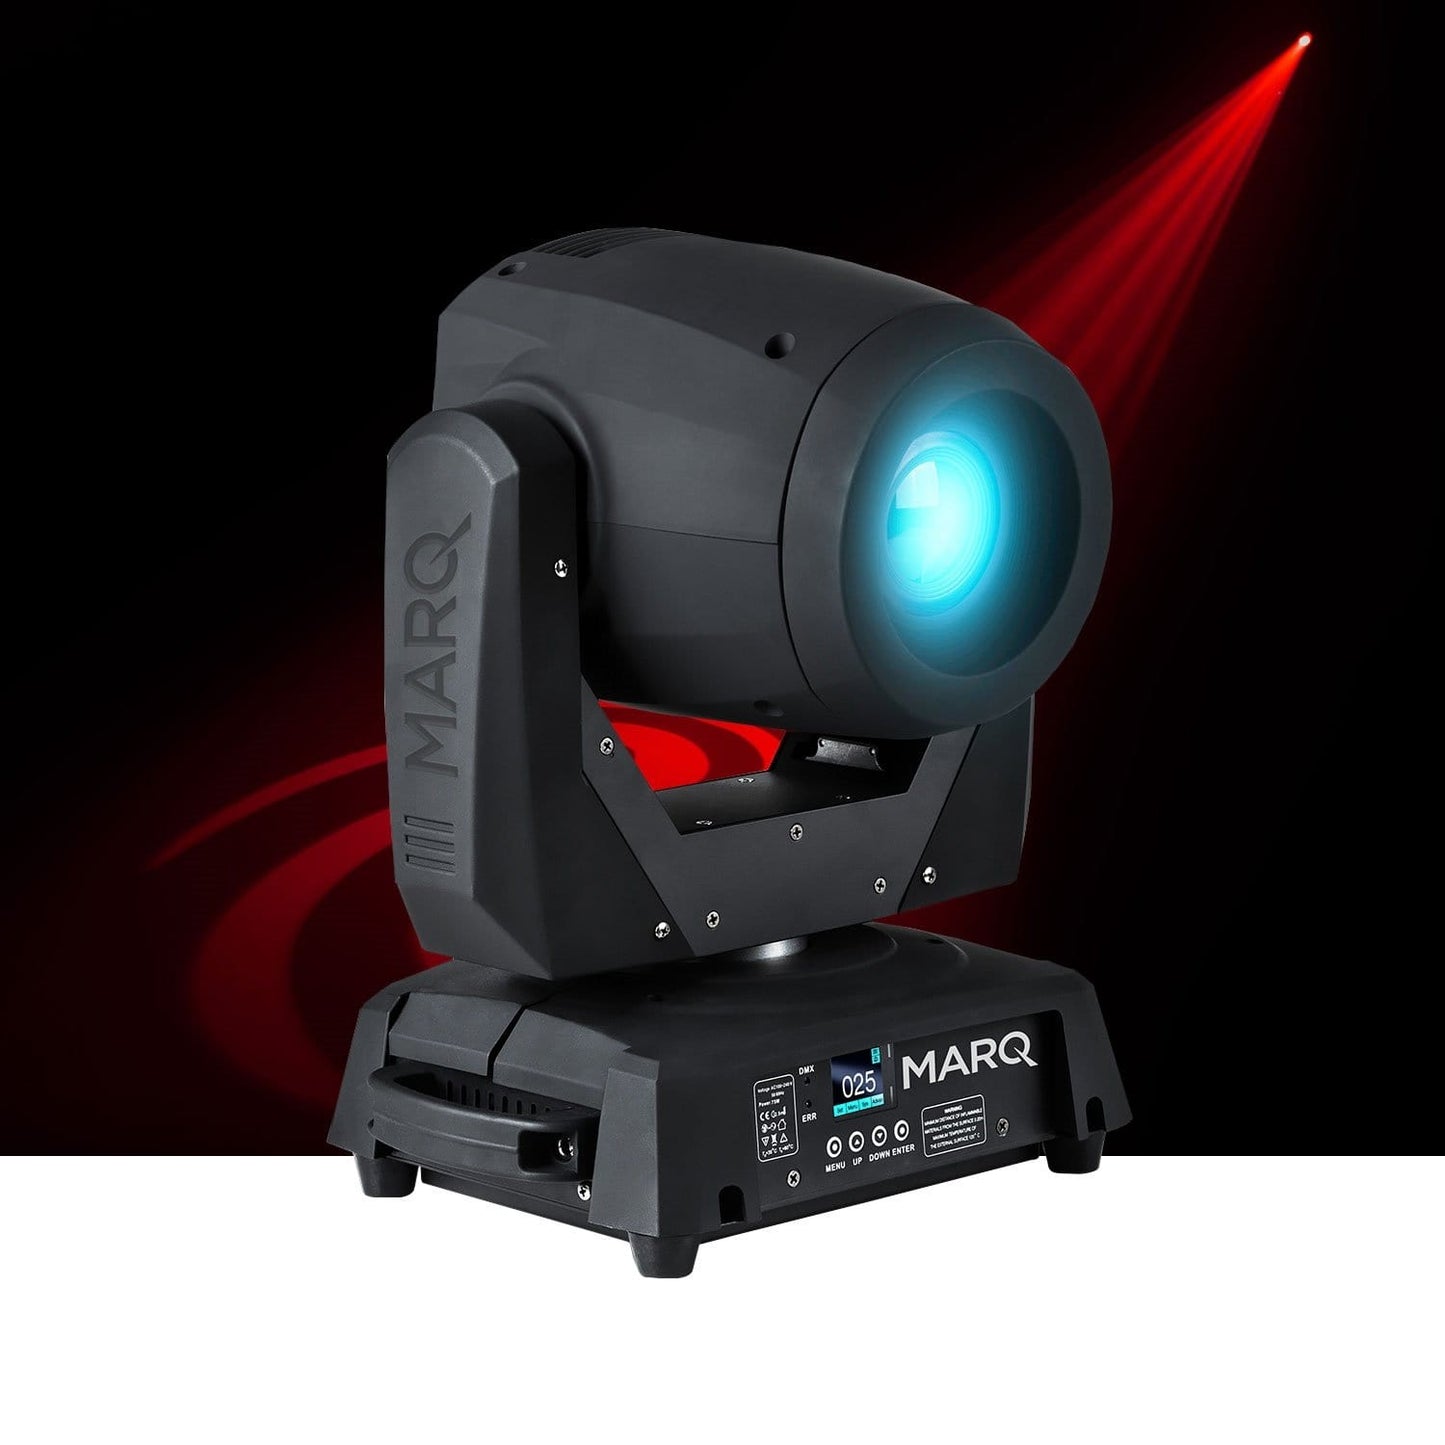 MARQ Gesture Spot 500 120W LED Moving Head Light - ProSound and Stage Lighting